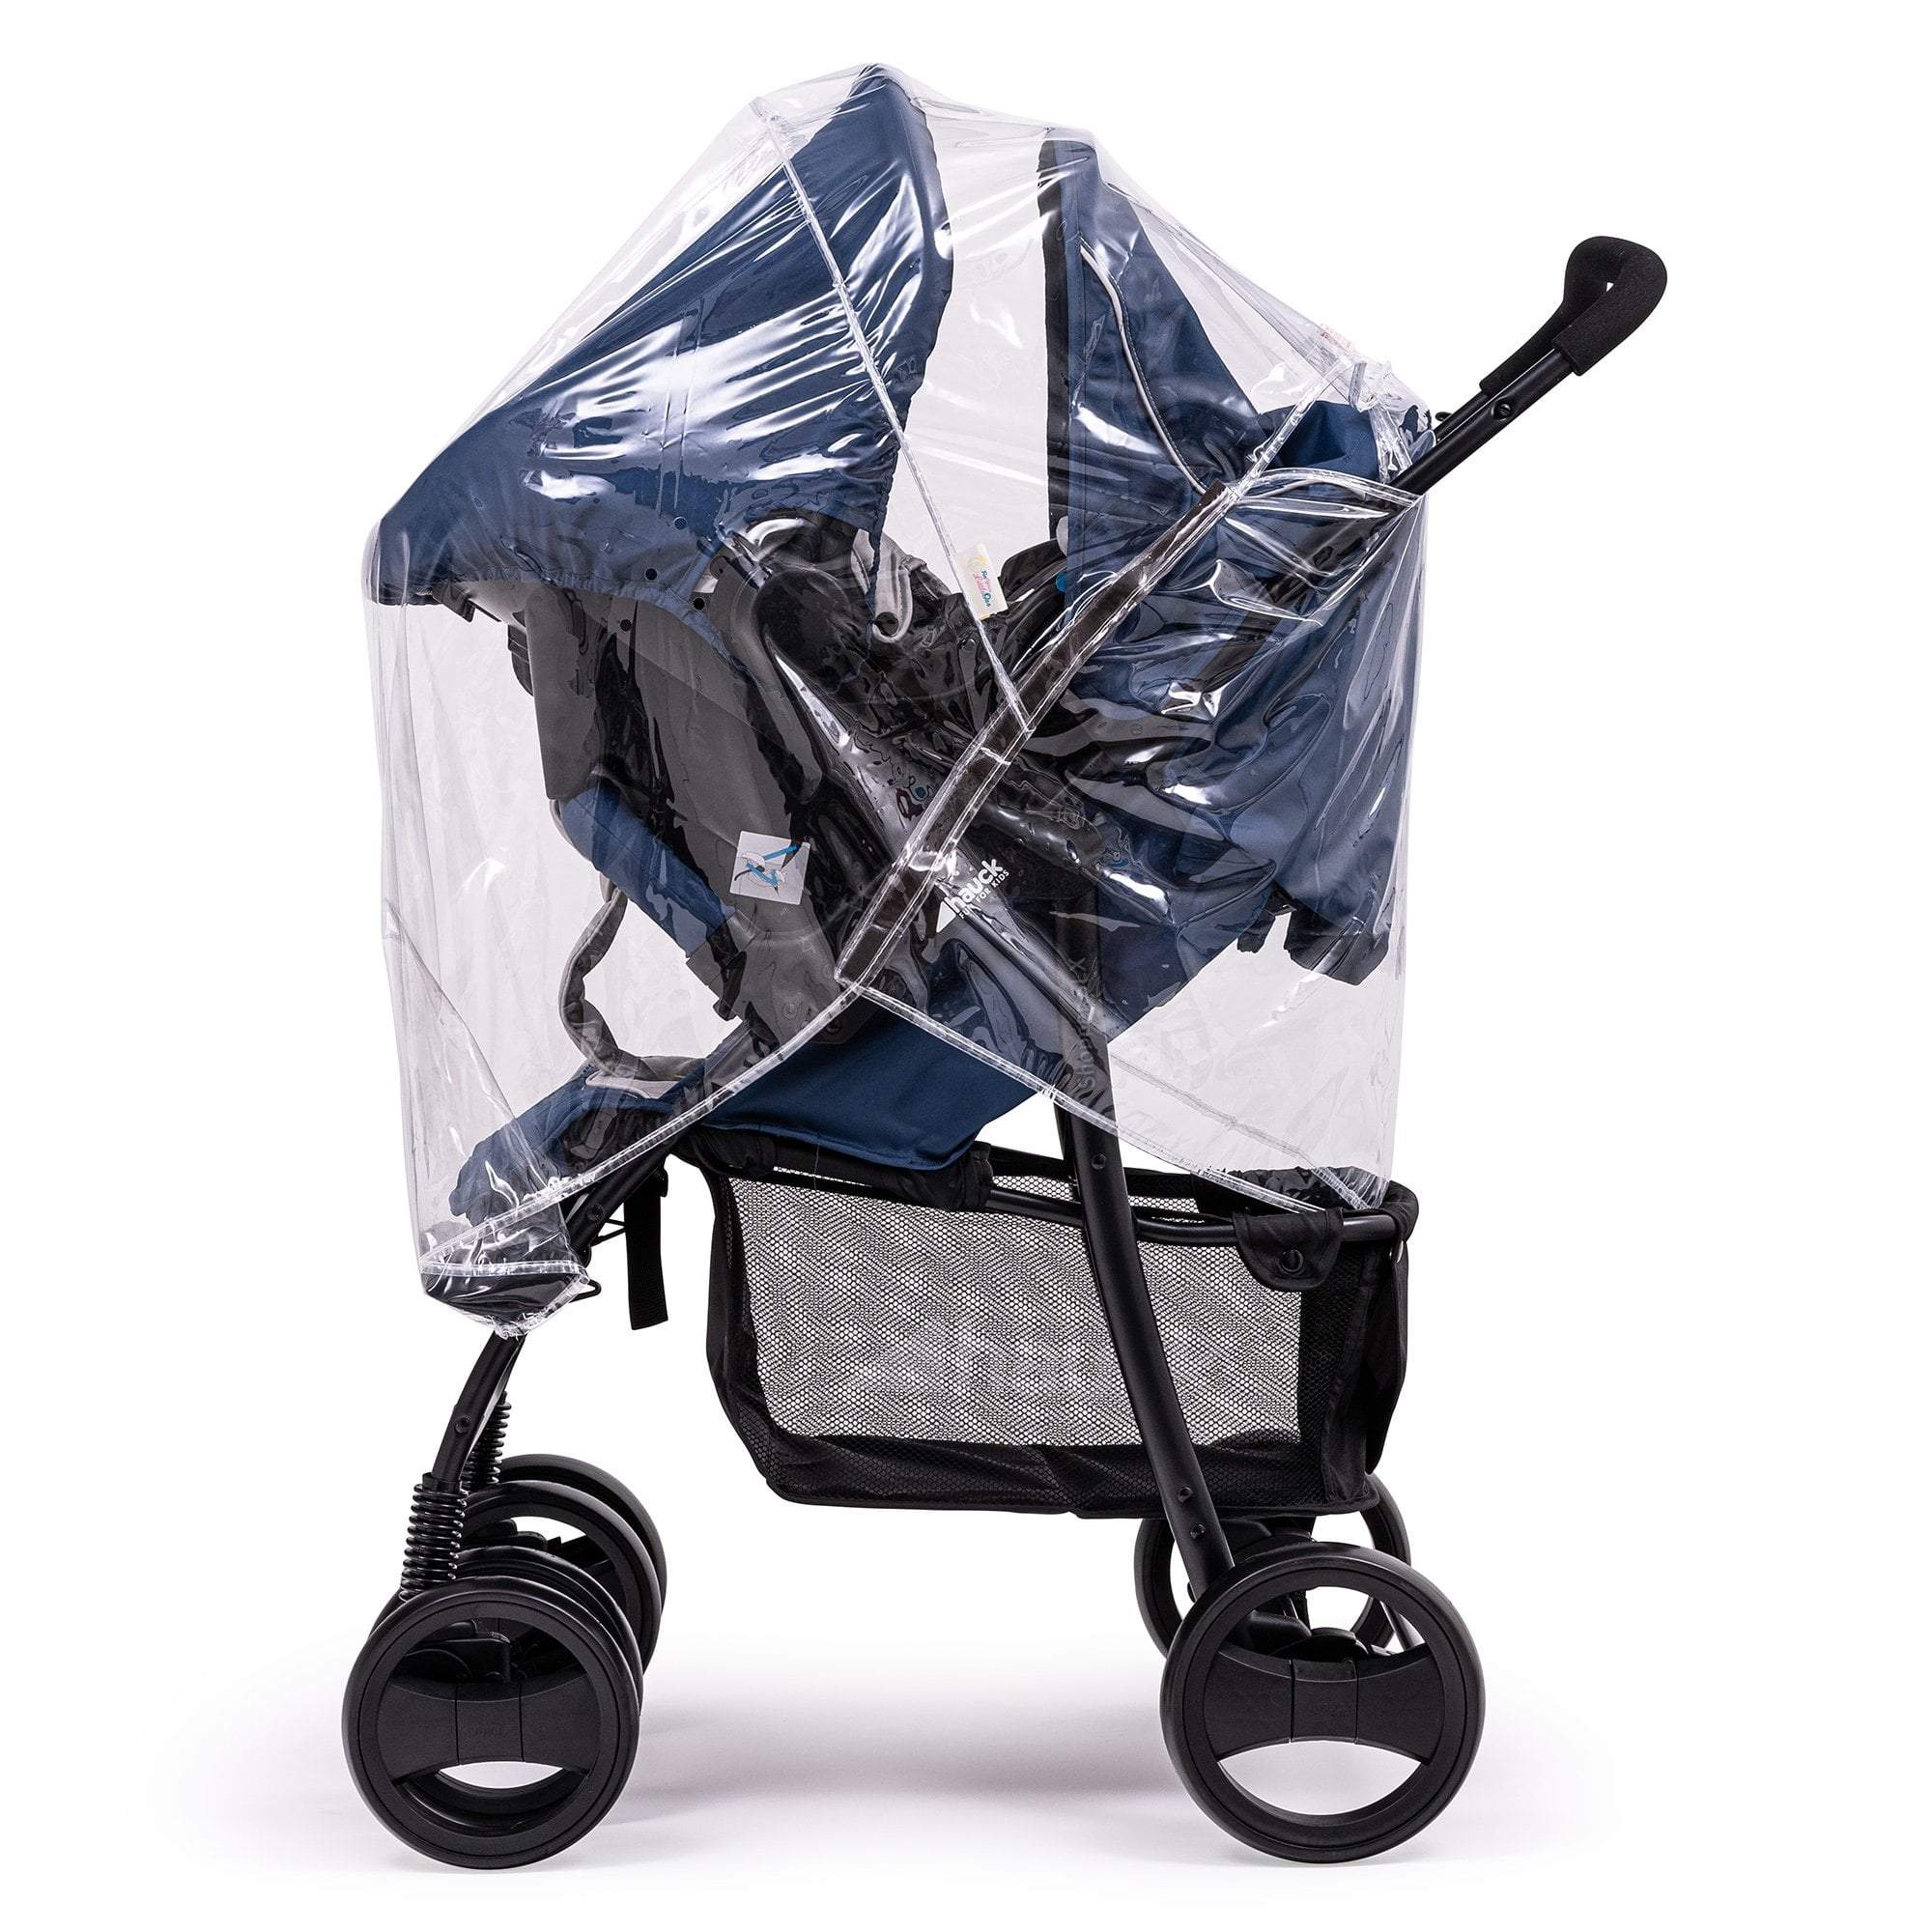 Travel System Raincover Compatible with iCandy - Fits All Models - For Your Little One